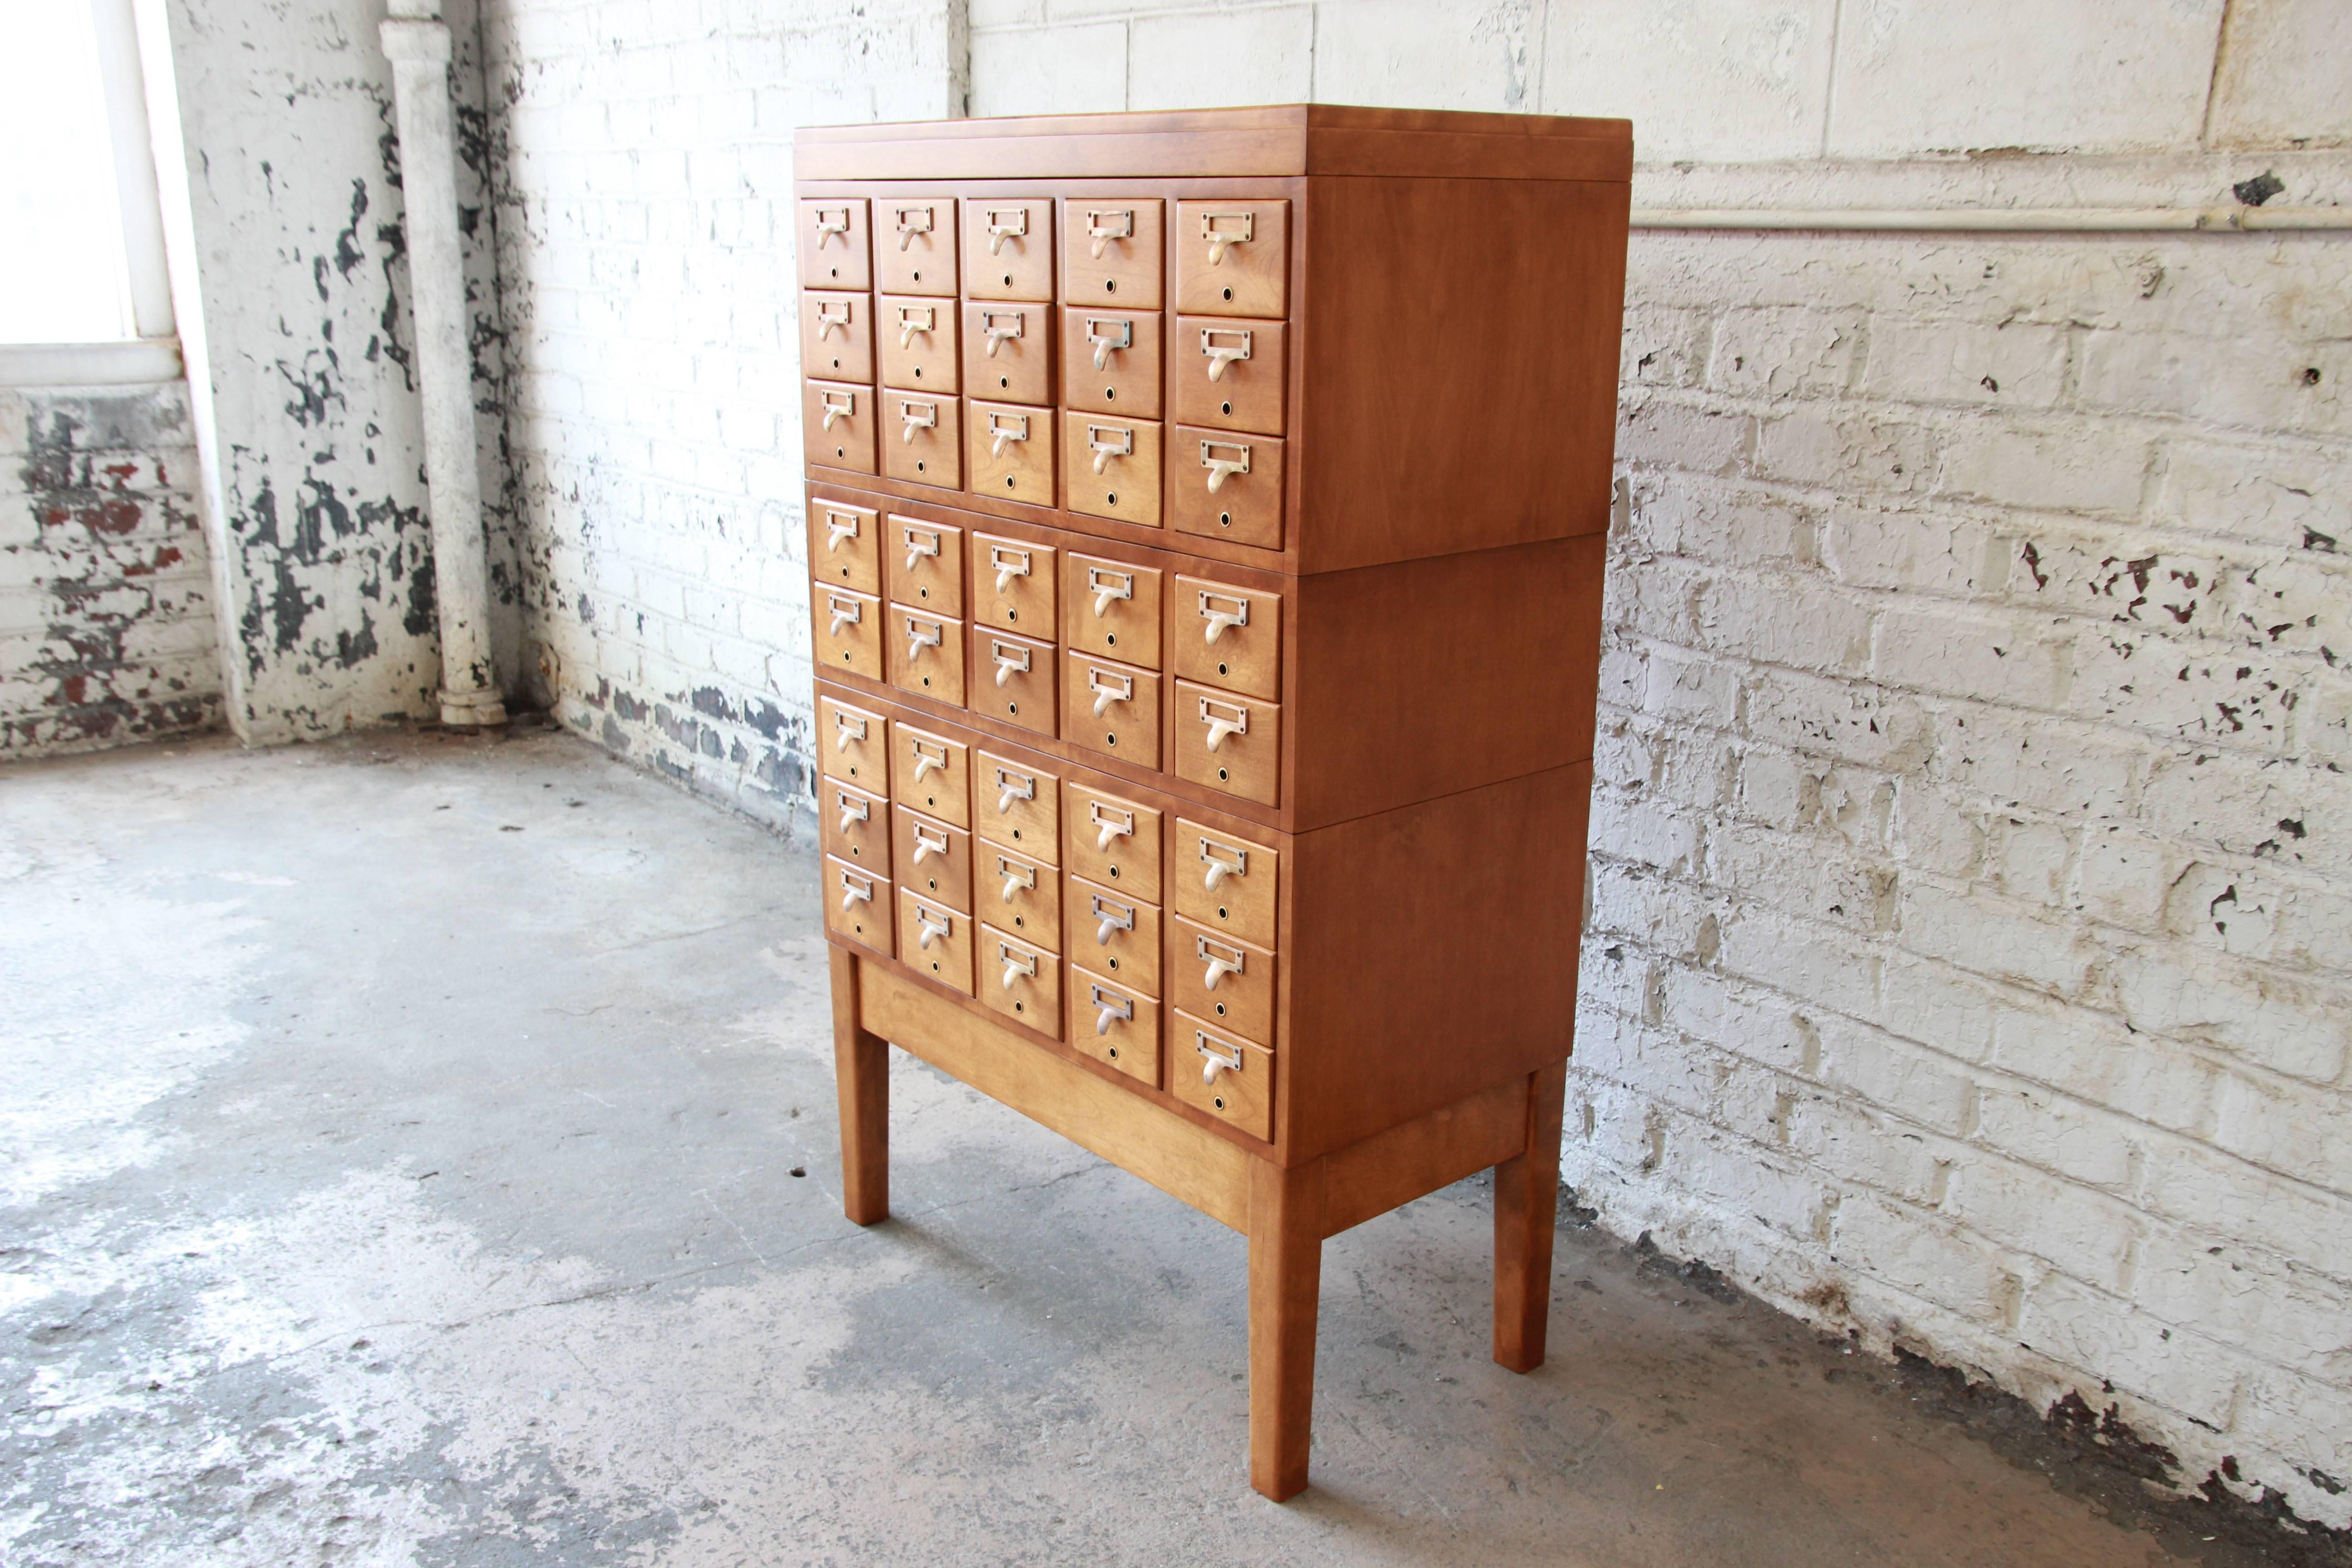 A rare and exceptional Mid-Century 40-drawer library card catalog. The catalog features solid maple construction, with dovetail joints. It comes in five stacking units, including: base, three sections of drawers, and the top. The catalog has been